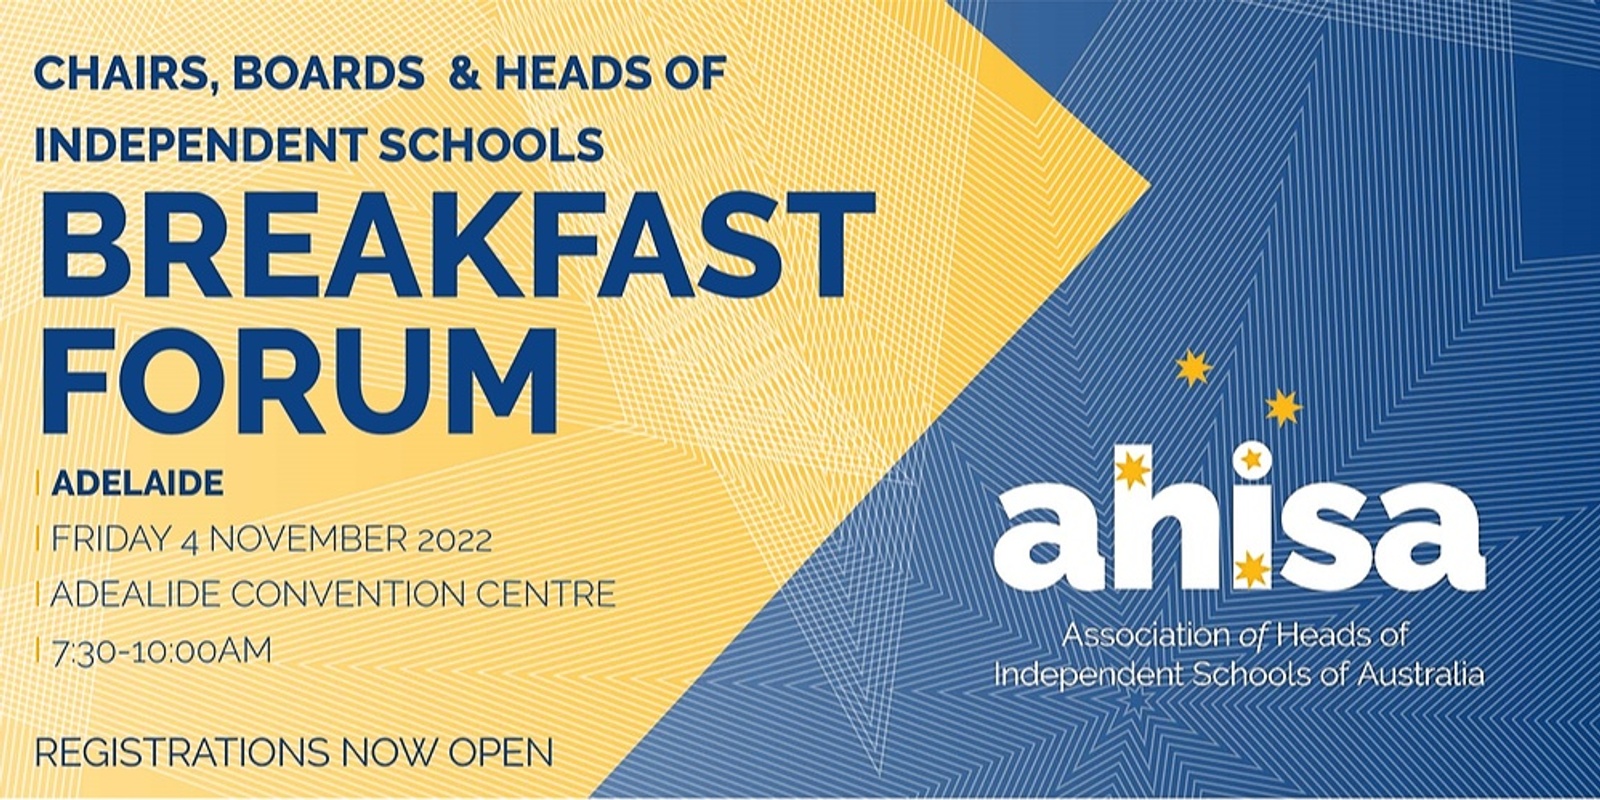 Banner image for Adelaide | AHISA Chairs, Boards & Heads Forum